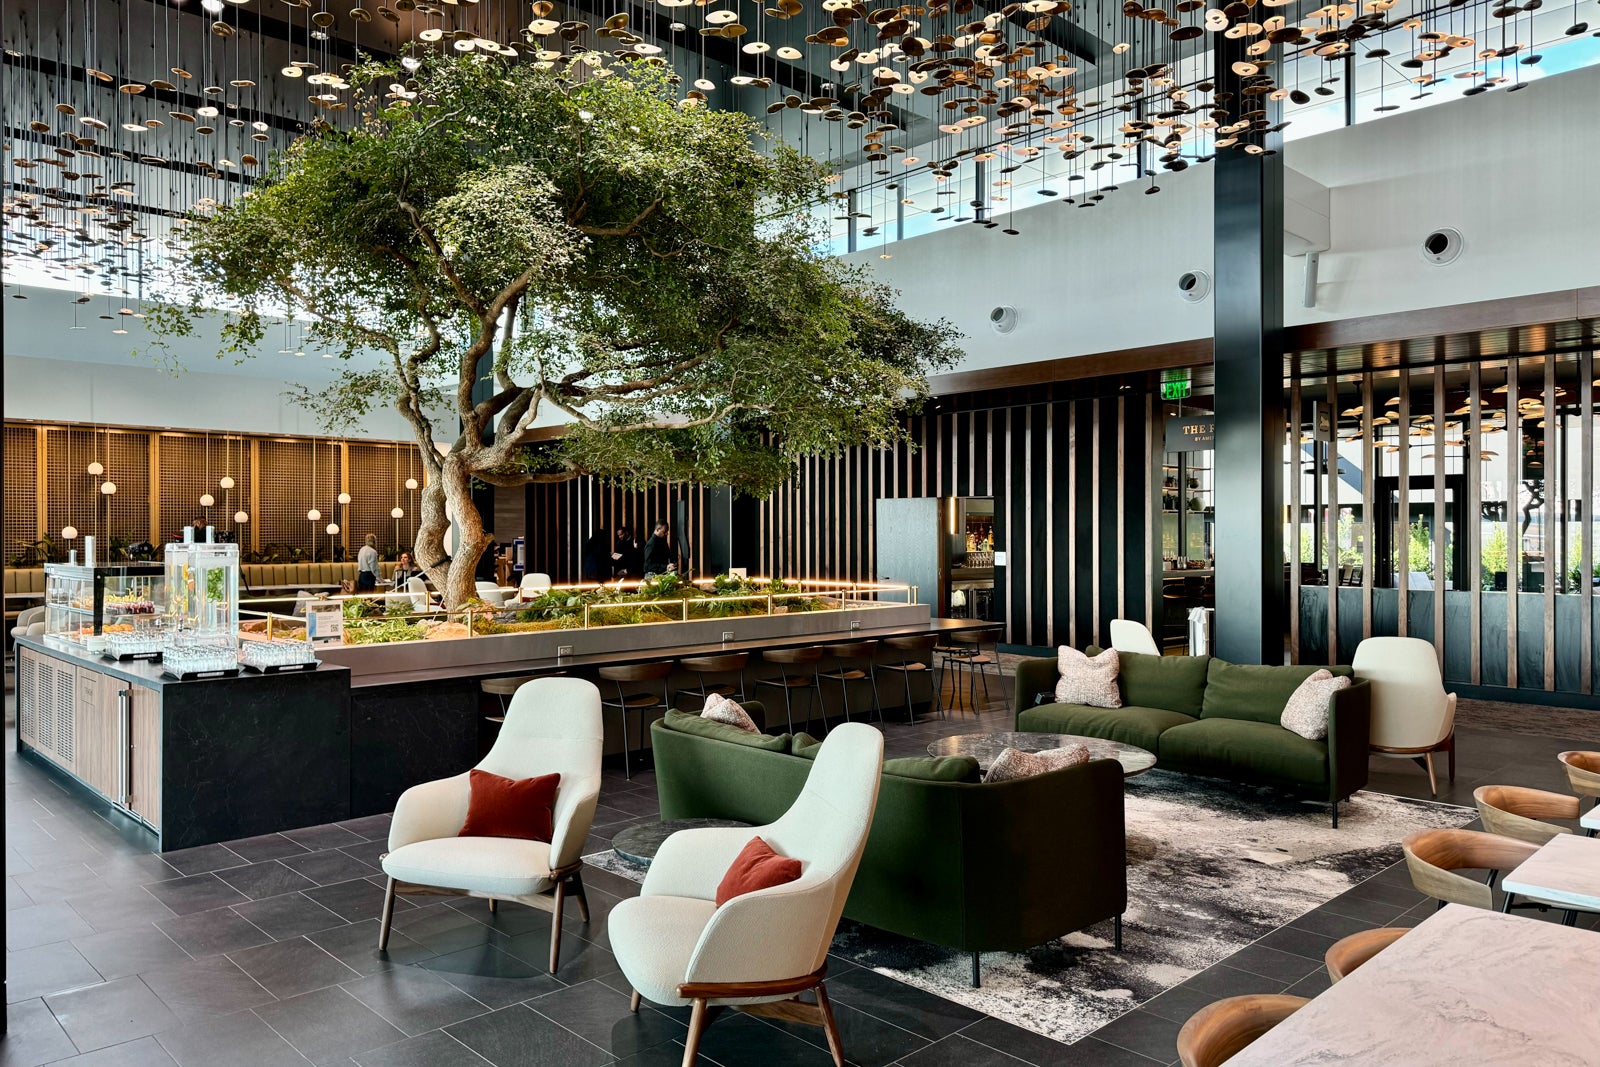 First look: Amex’s gorgeous new Centurion Lounge in Atlanta